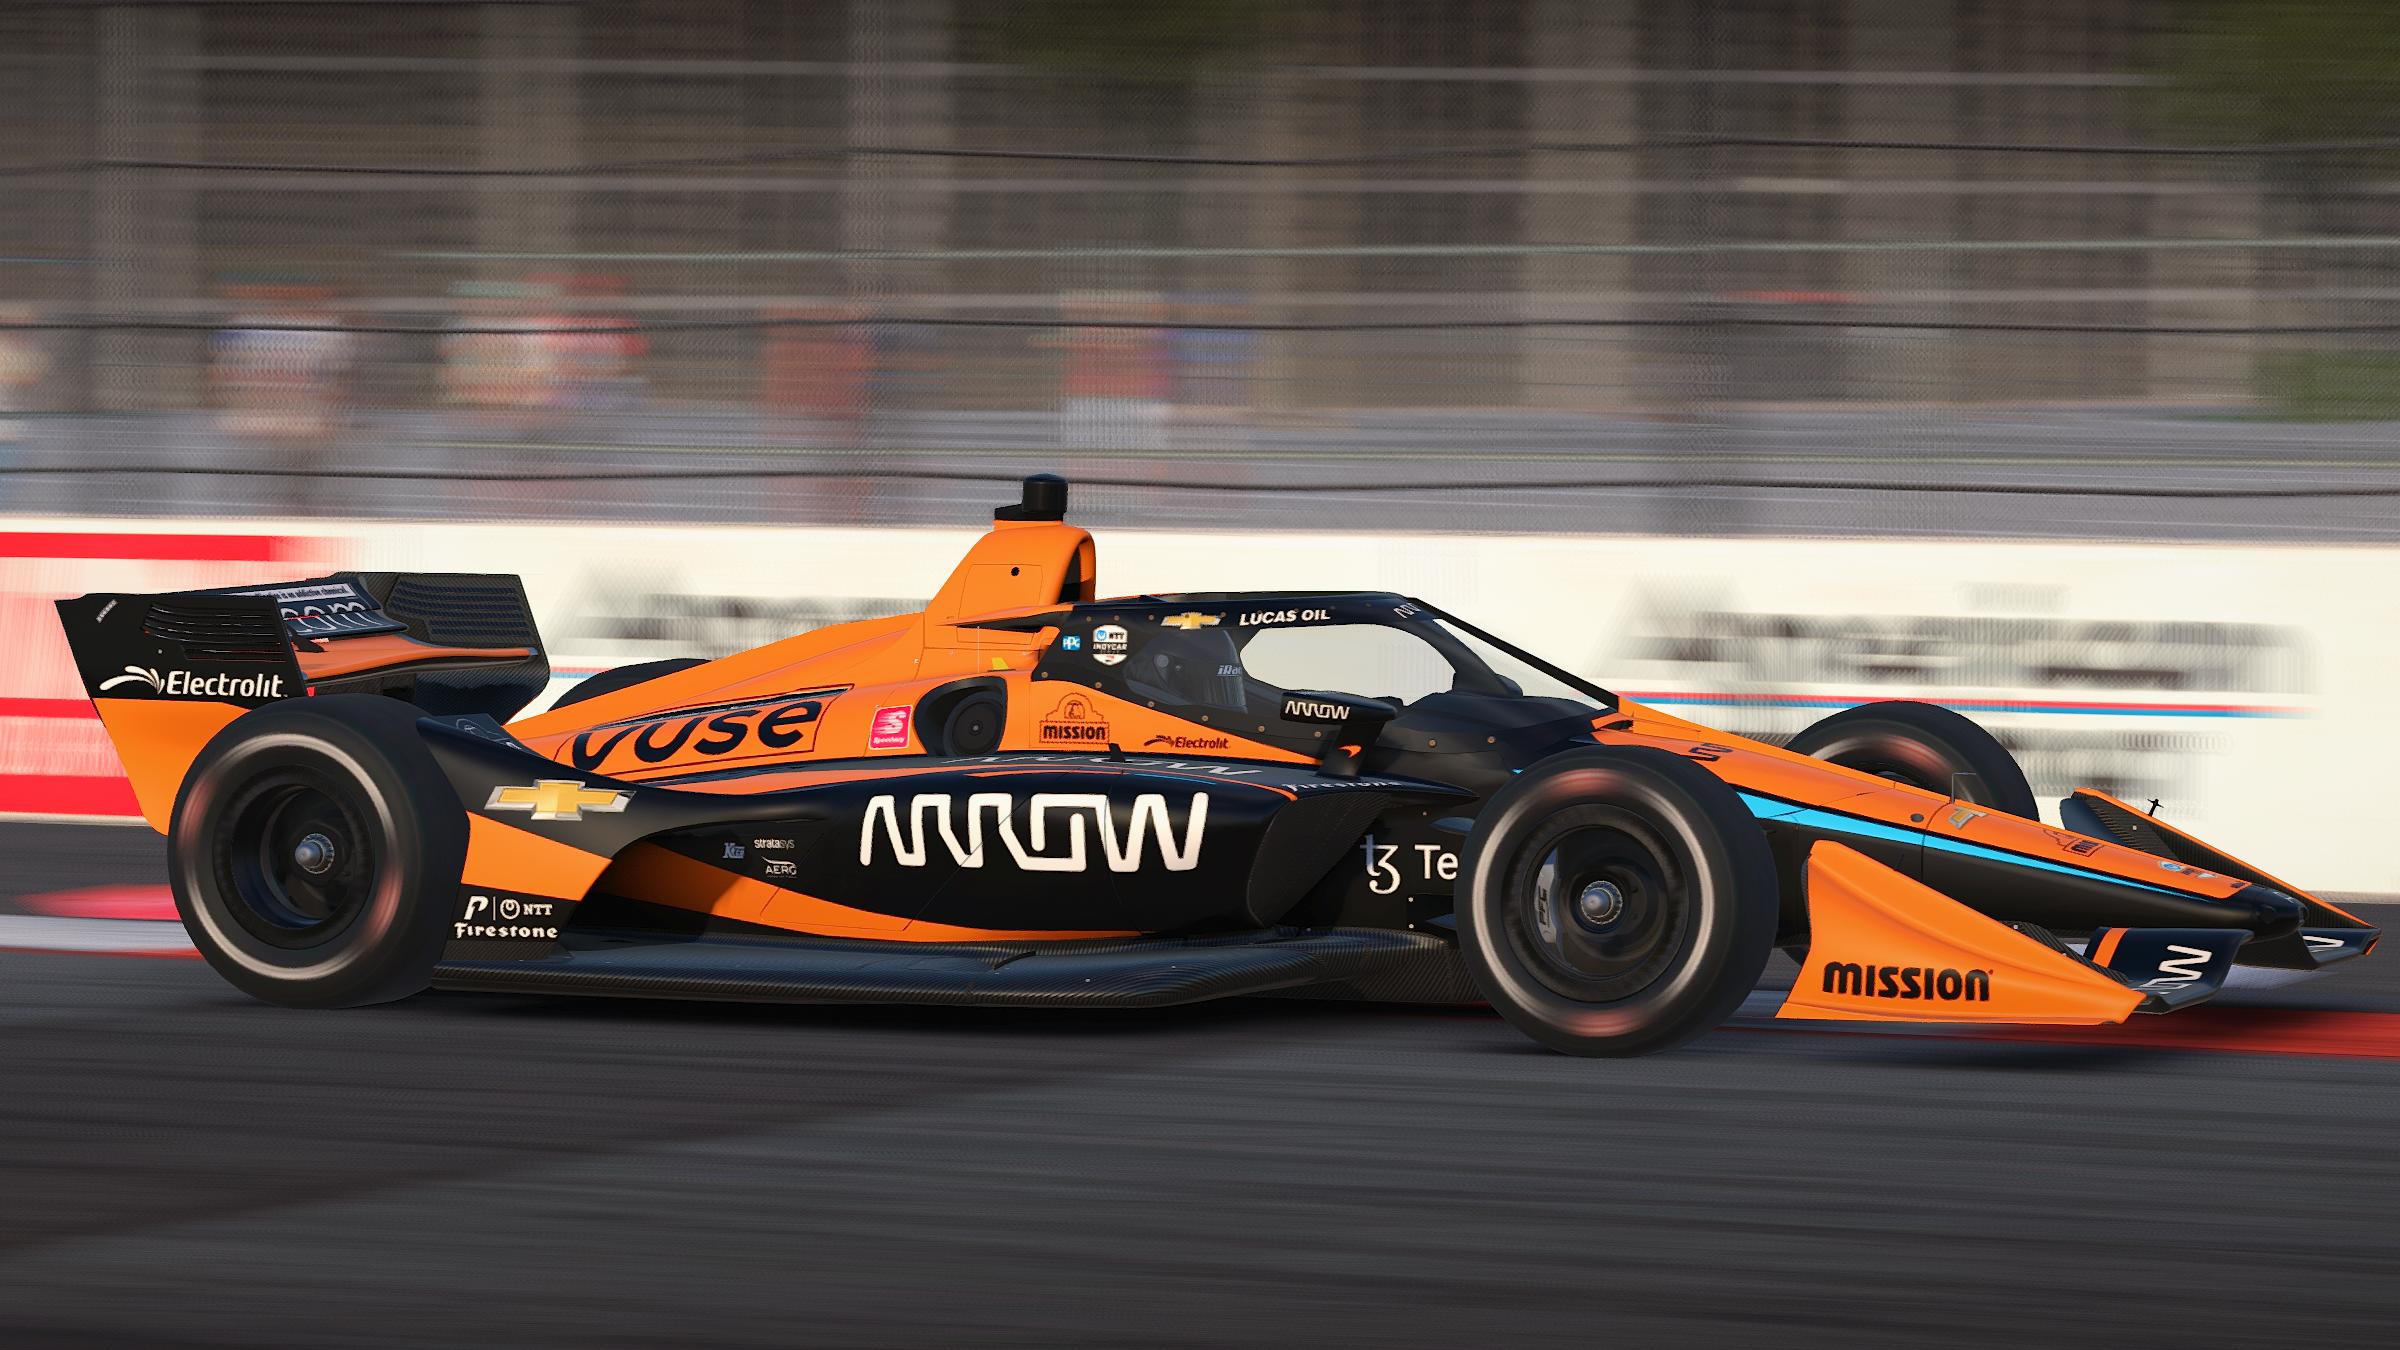 Preview of 2022 Pato OWard Arrow IndyCar by Jeff McKeand